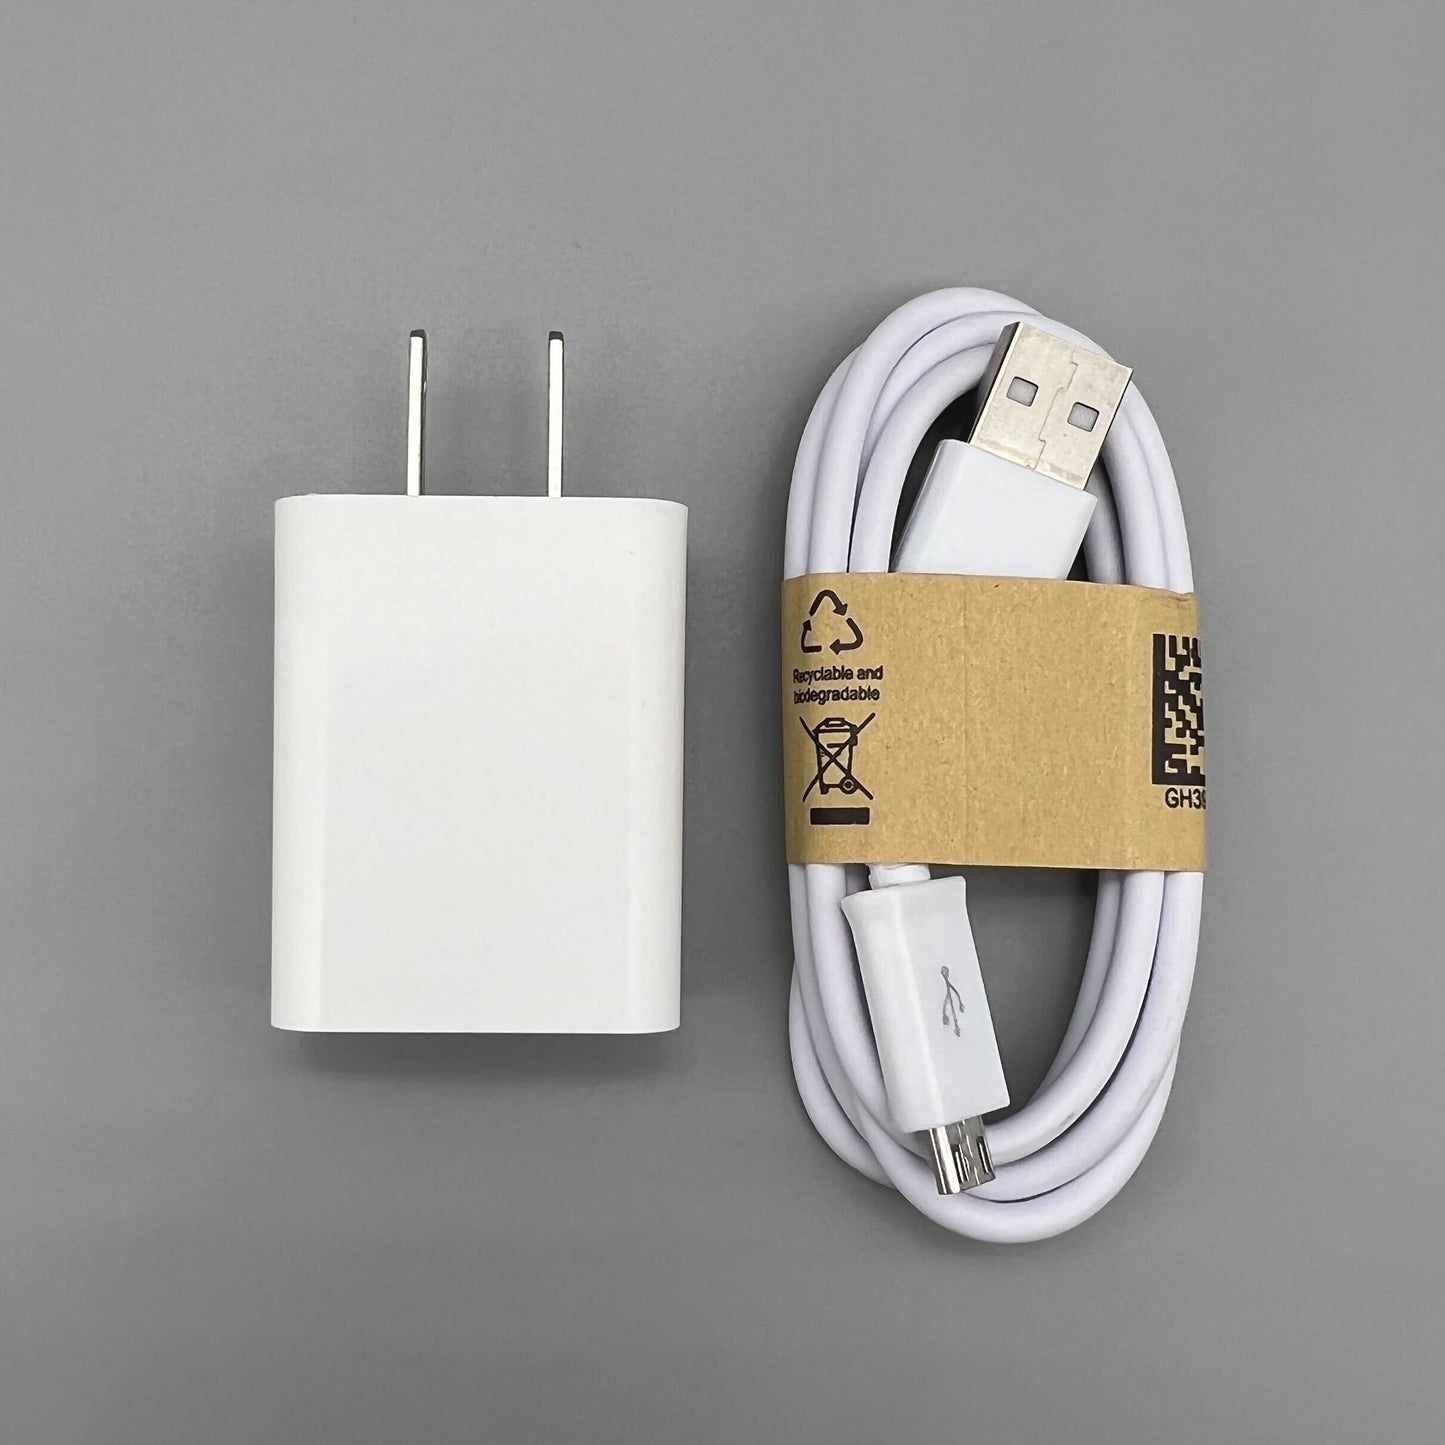 5V2A Micro USB Cable and Wall Charger